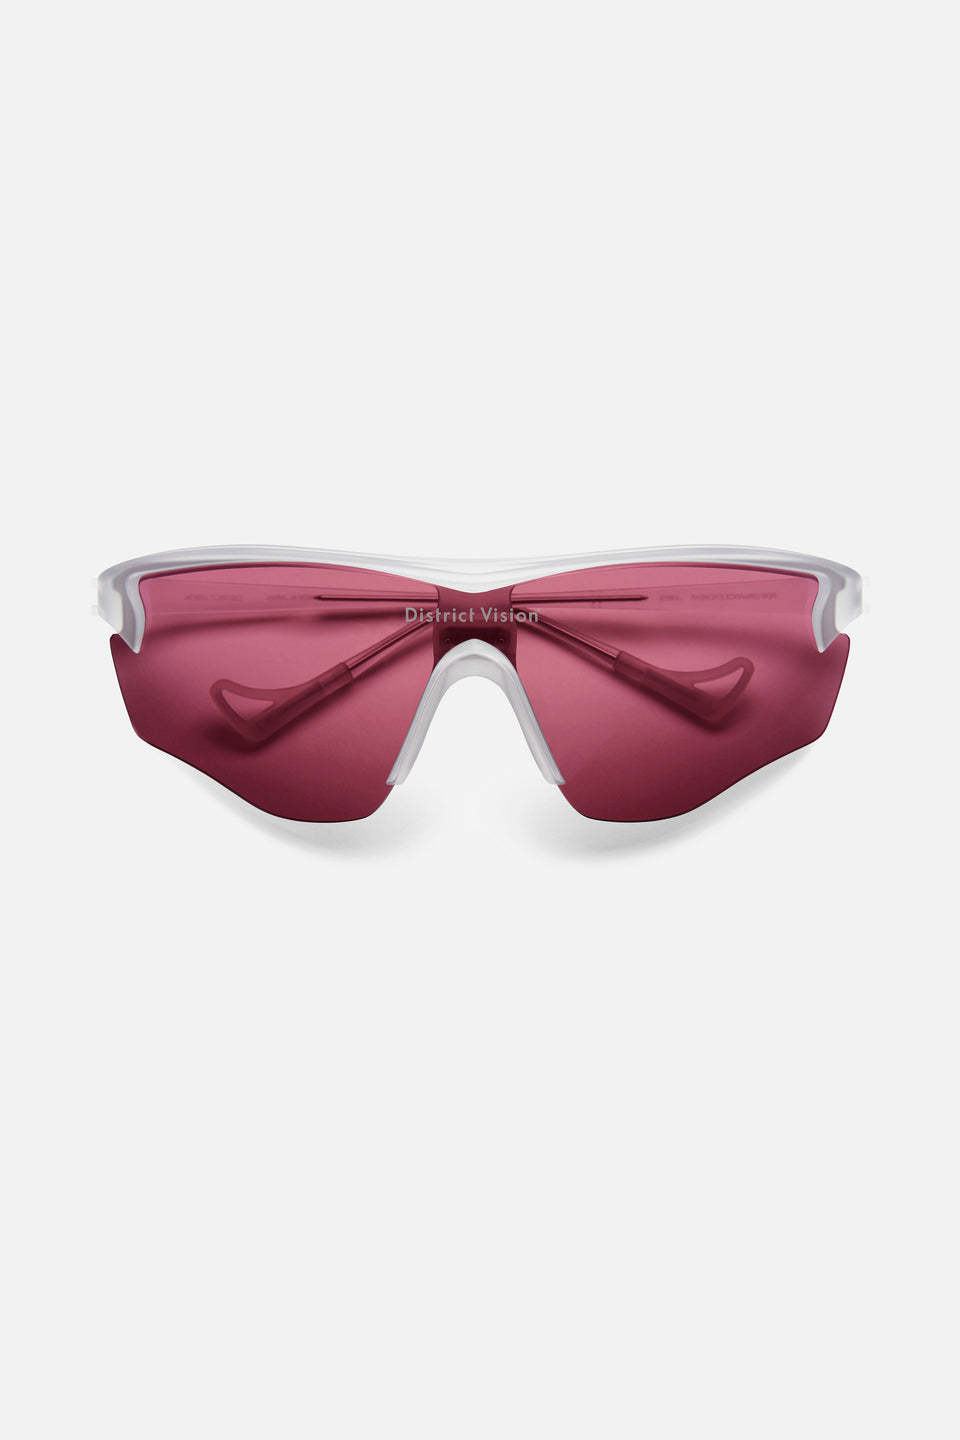 District Vision Trail Running Sunglasses Los Angeles Junya Racer Clear D+ Black Rose FW23 Calculus Victoria BC Canada